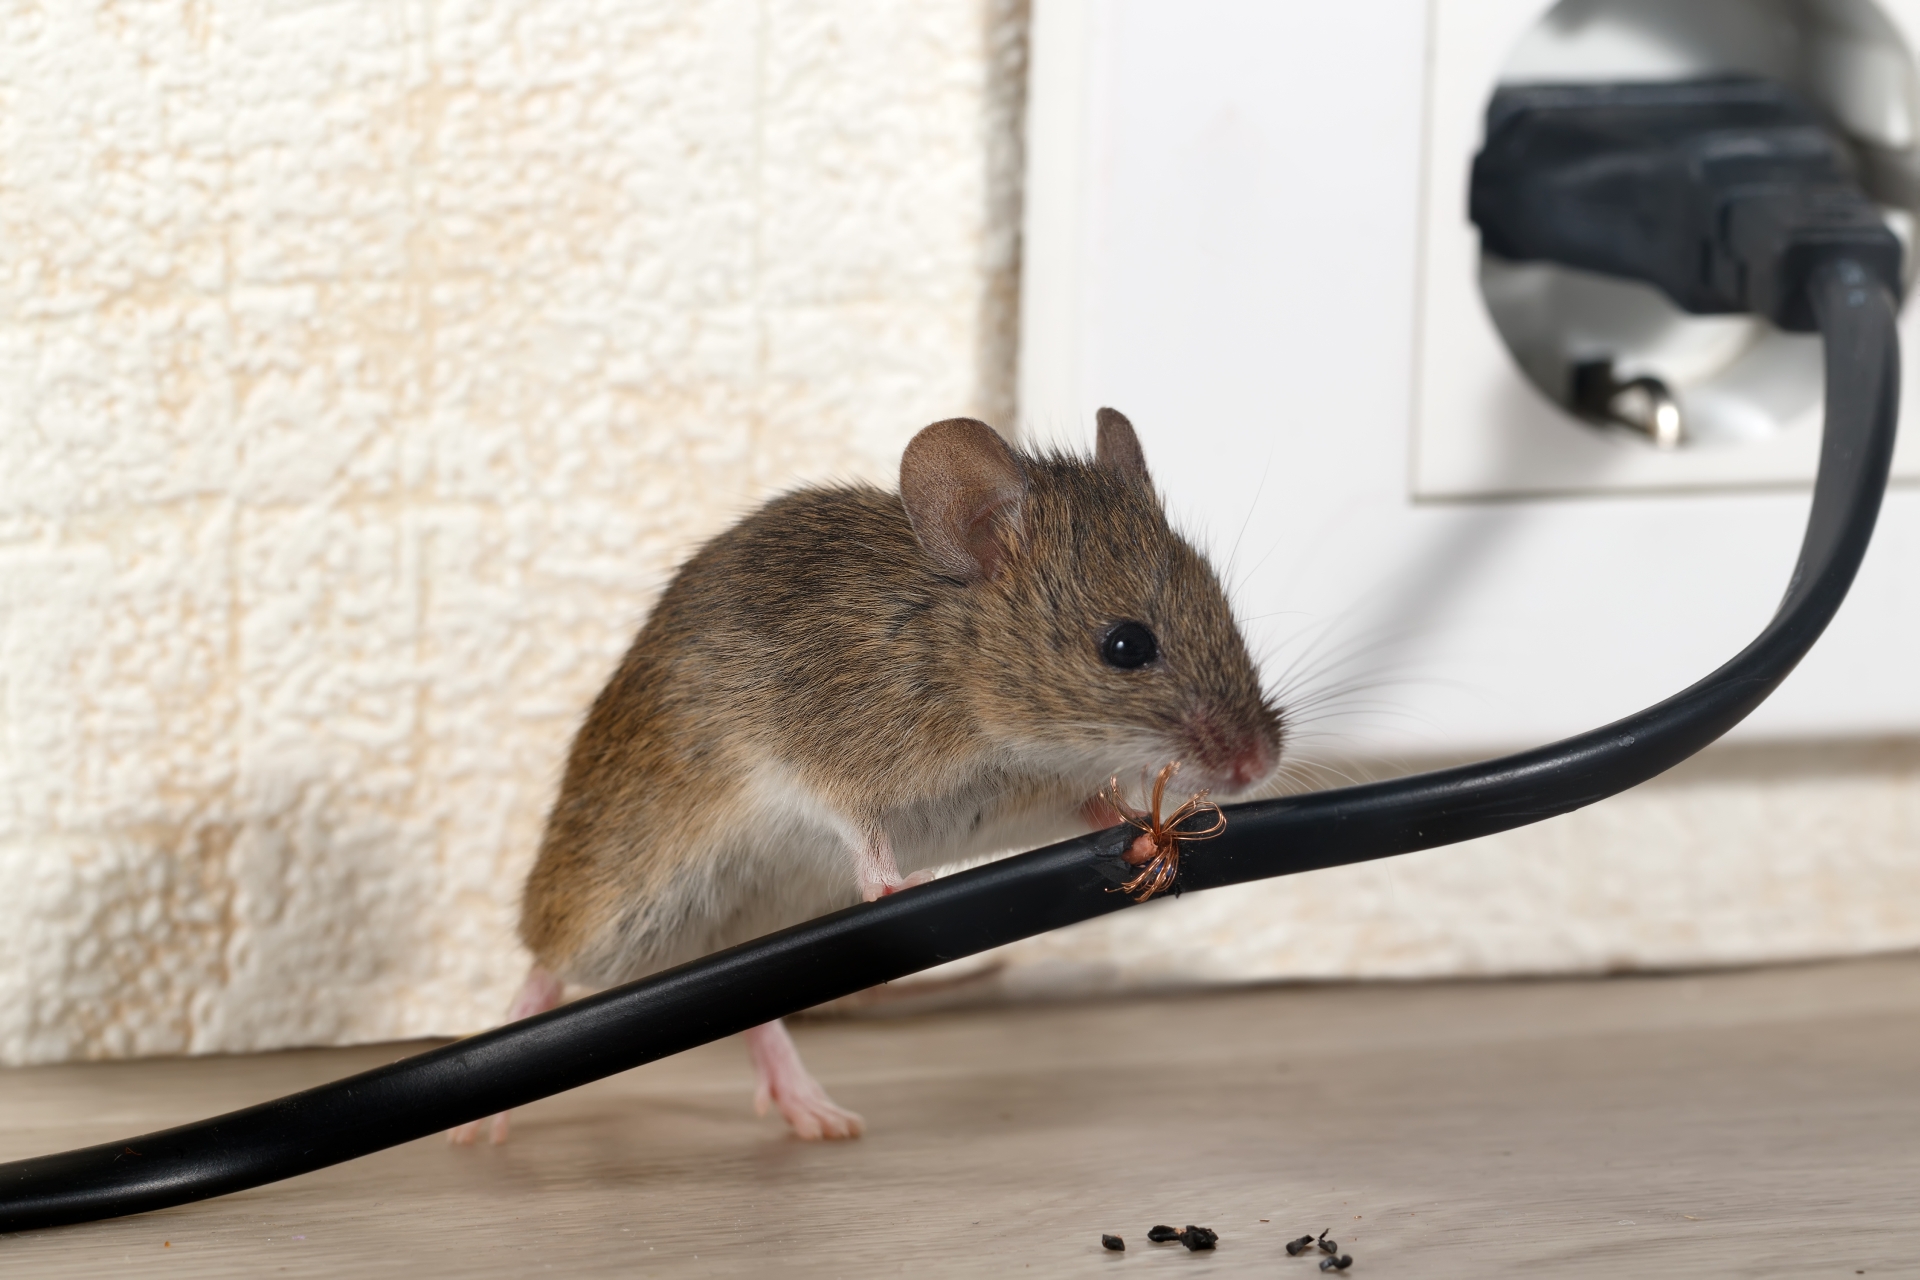 Mice Infestation, Pest Control in Mill Hill, NW7. Call Now 020 8166 9746